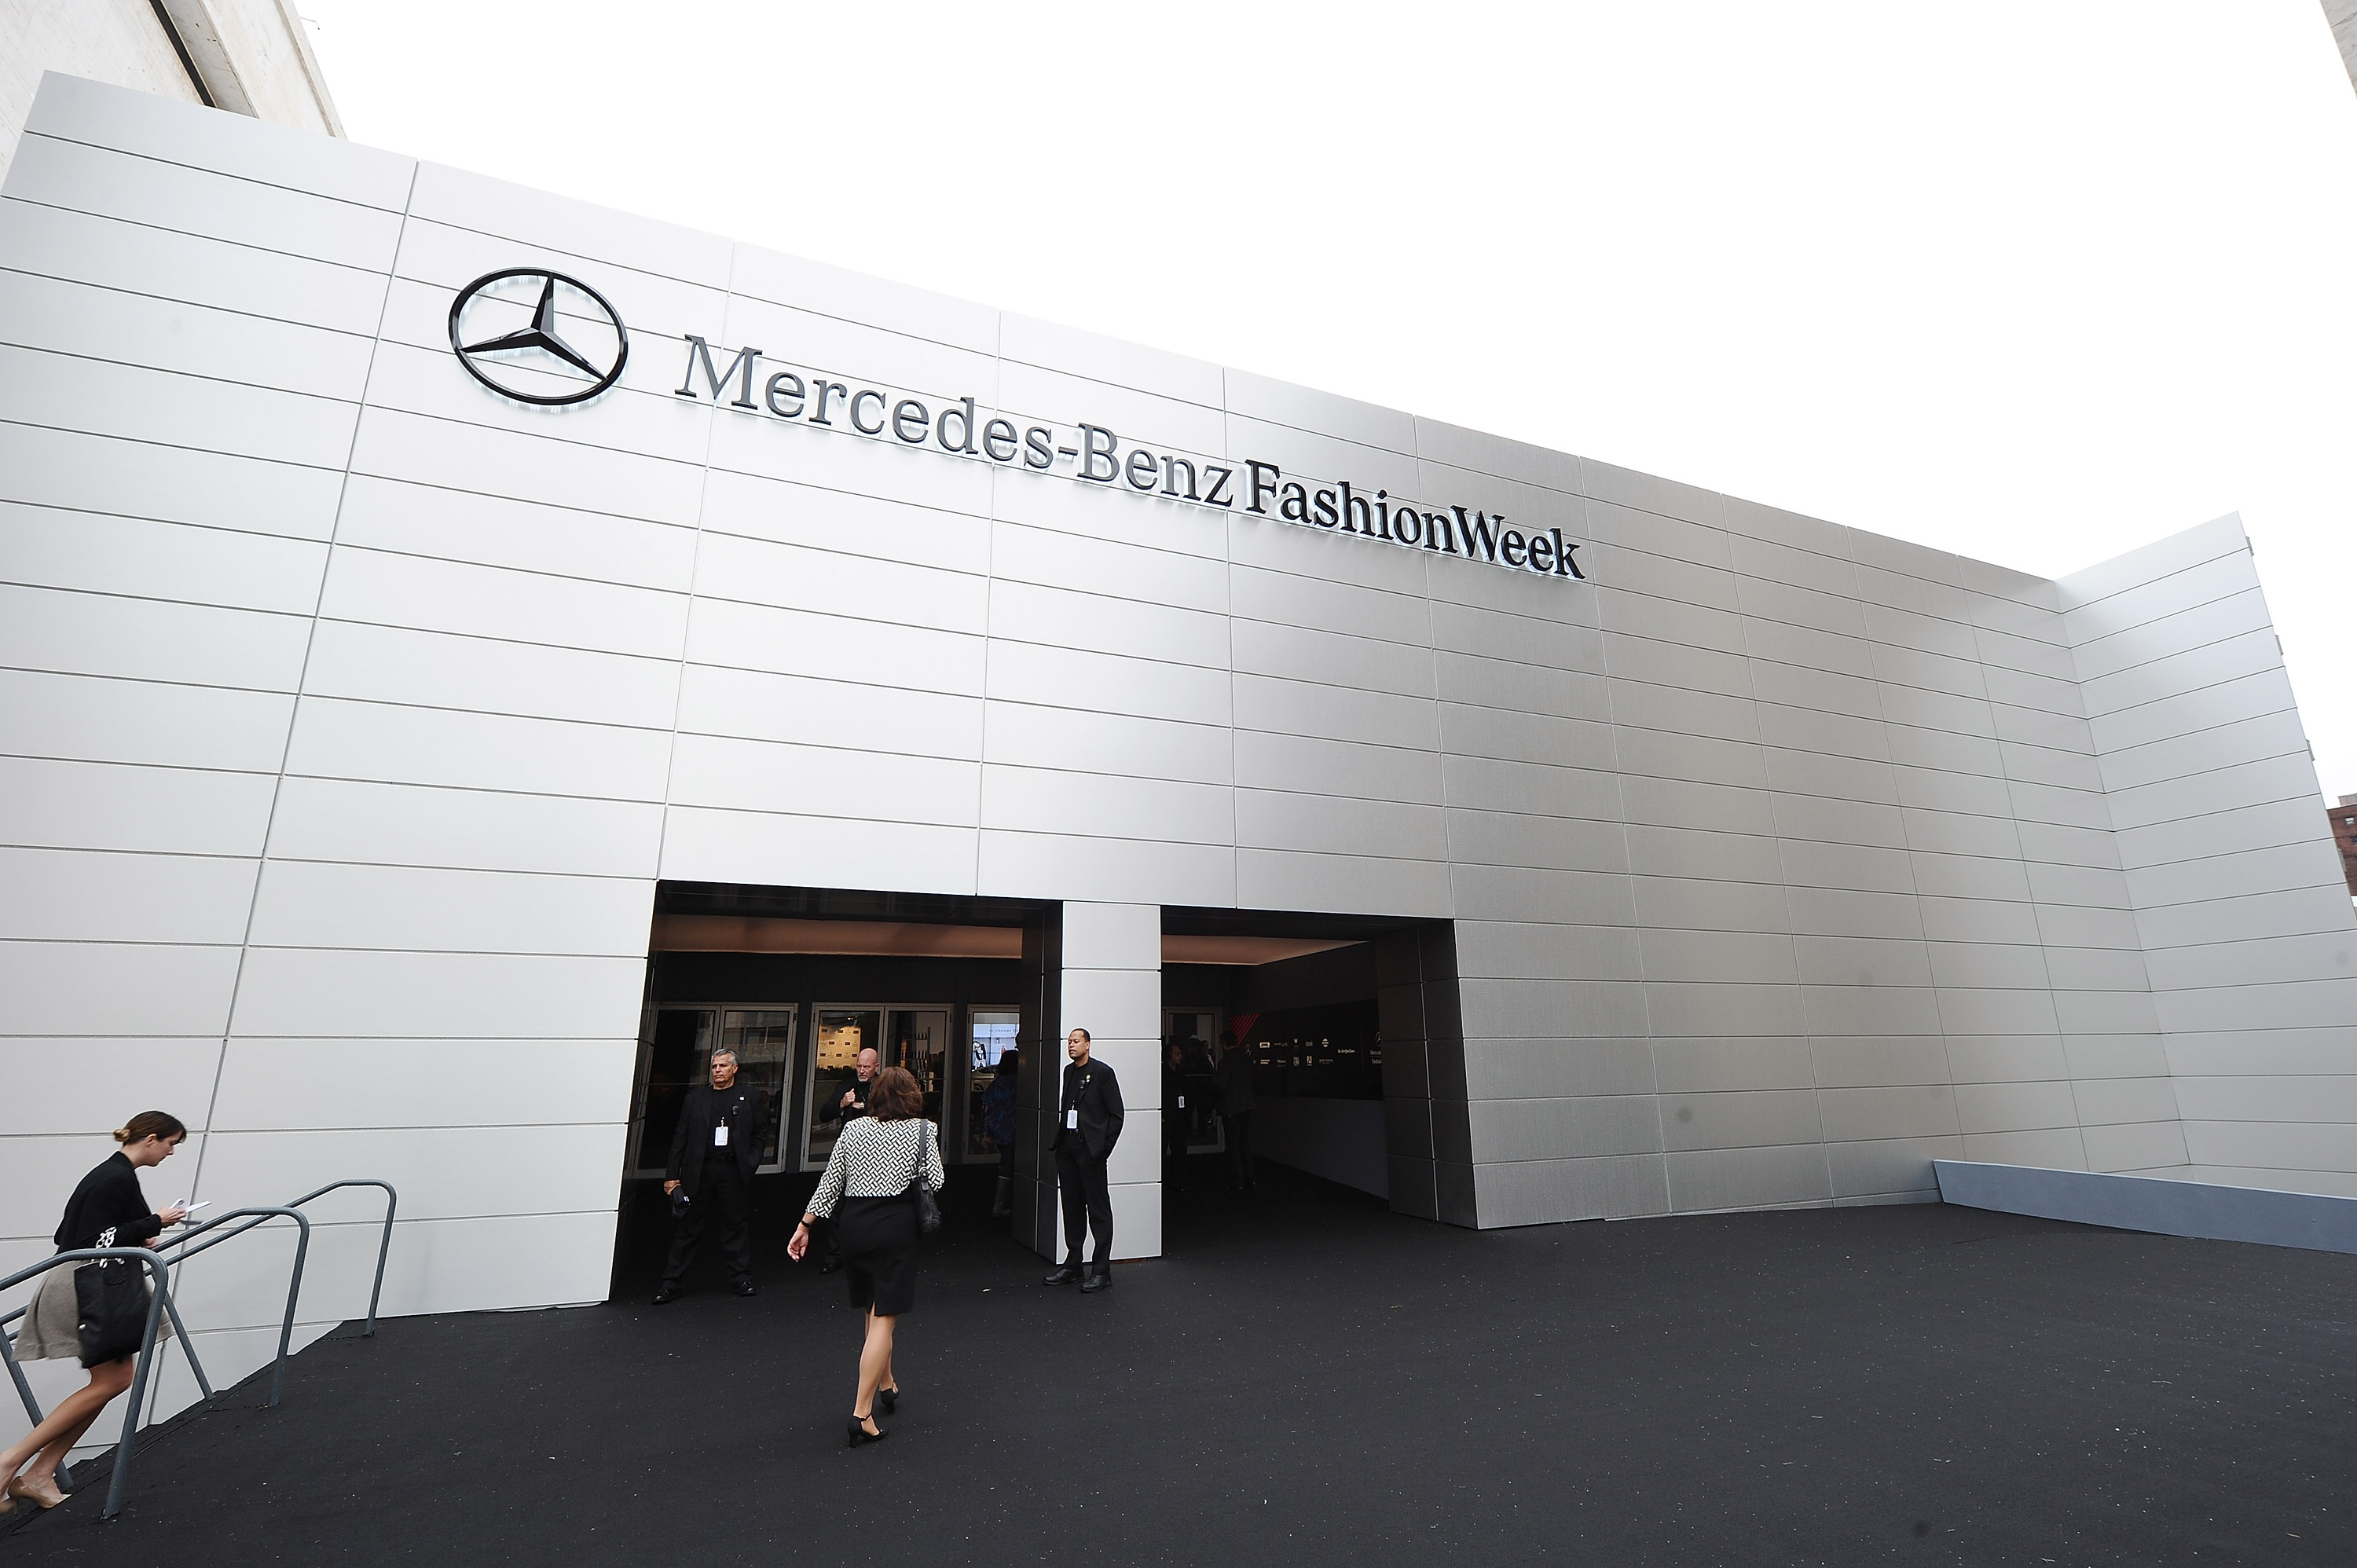 Mercedes-Benz Fashion Week Spring 2012 - Official Coverage - People and Atmosphere Day 1